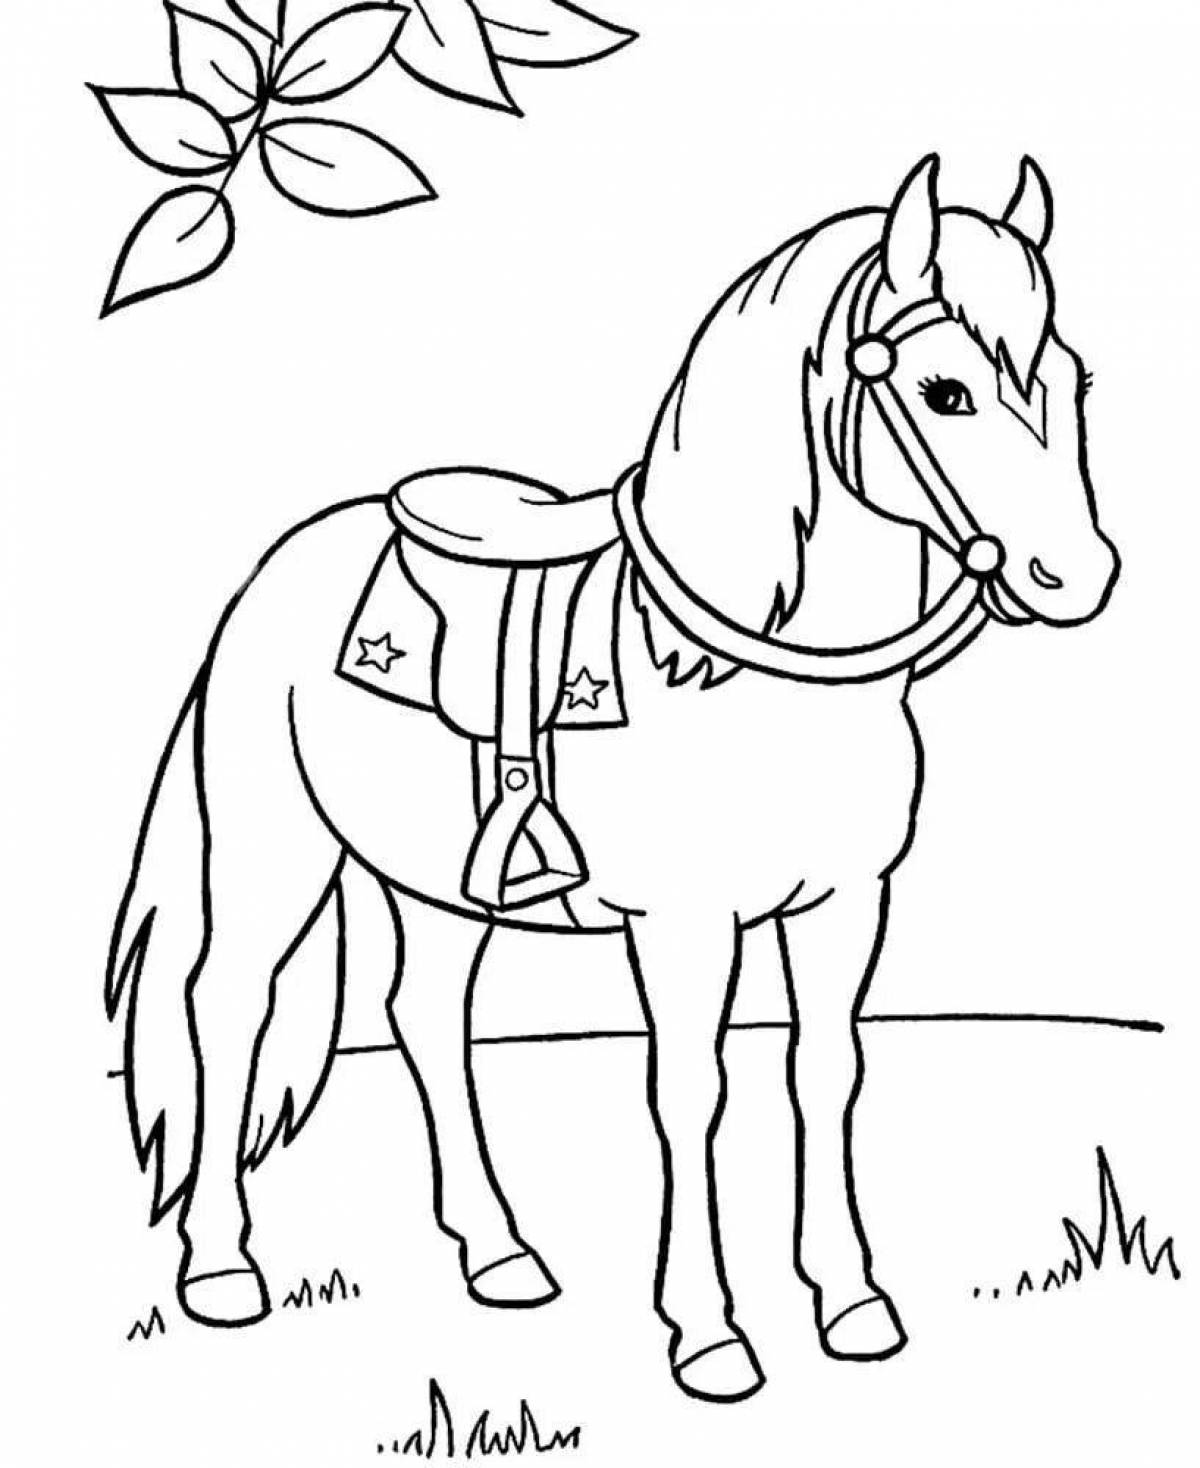 Colourful horse coloring book for children 4-5 years old